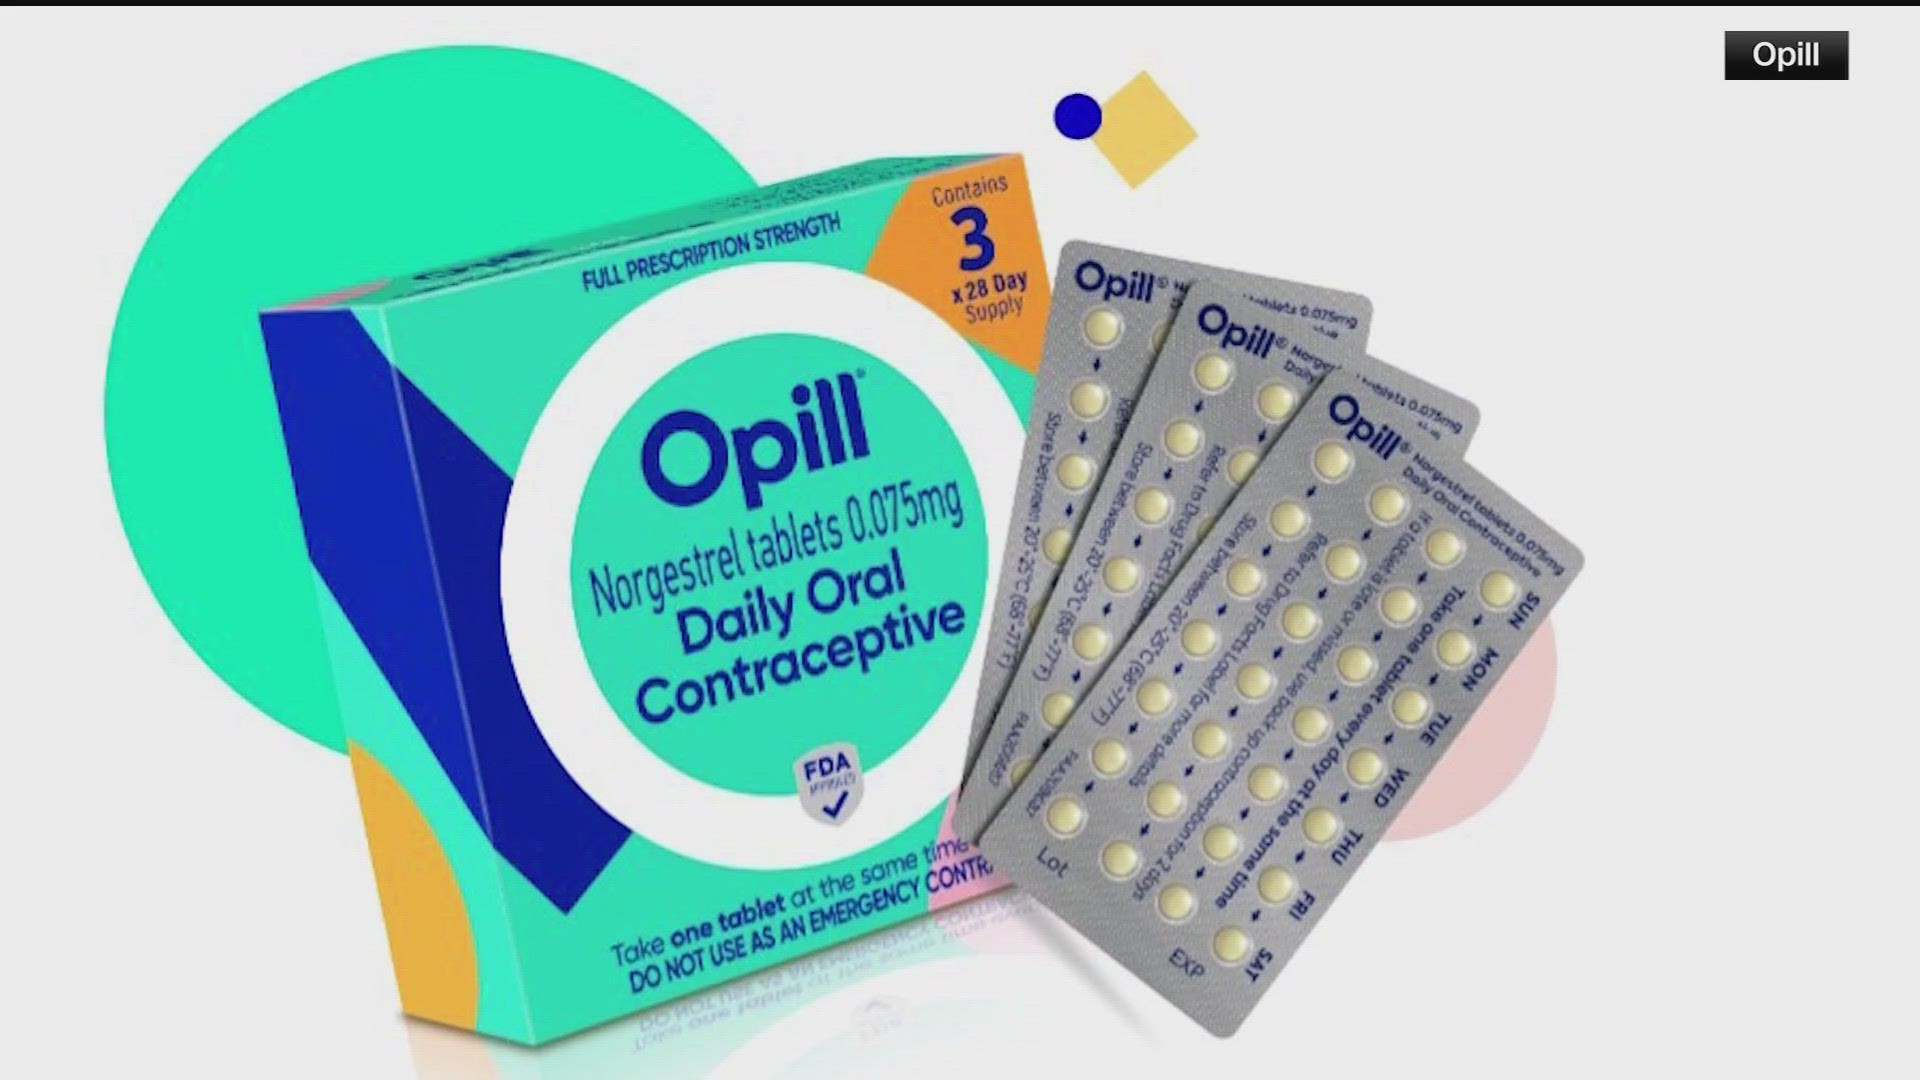 OPill can be bought directly from its own website.